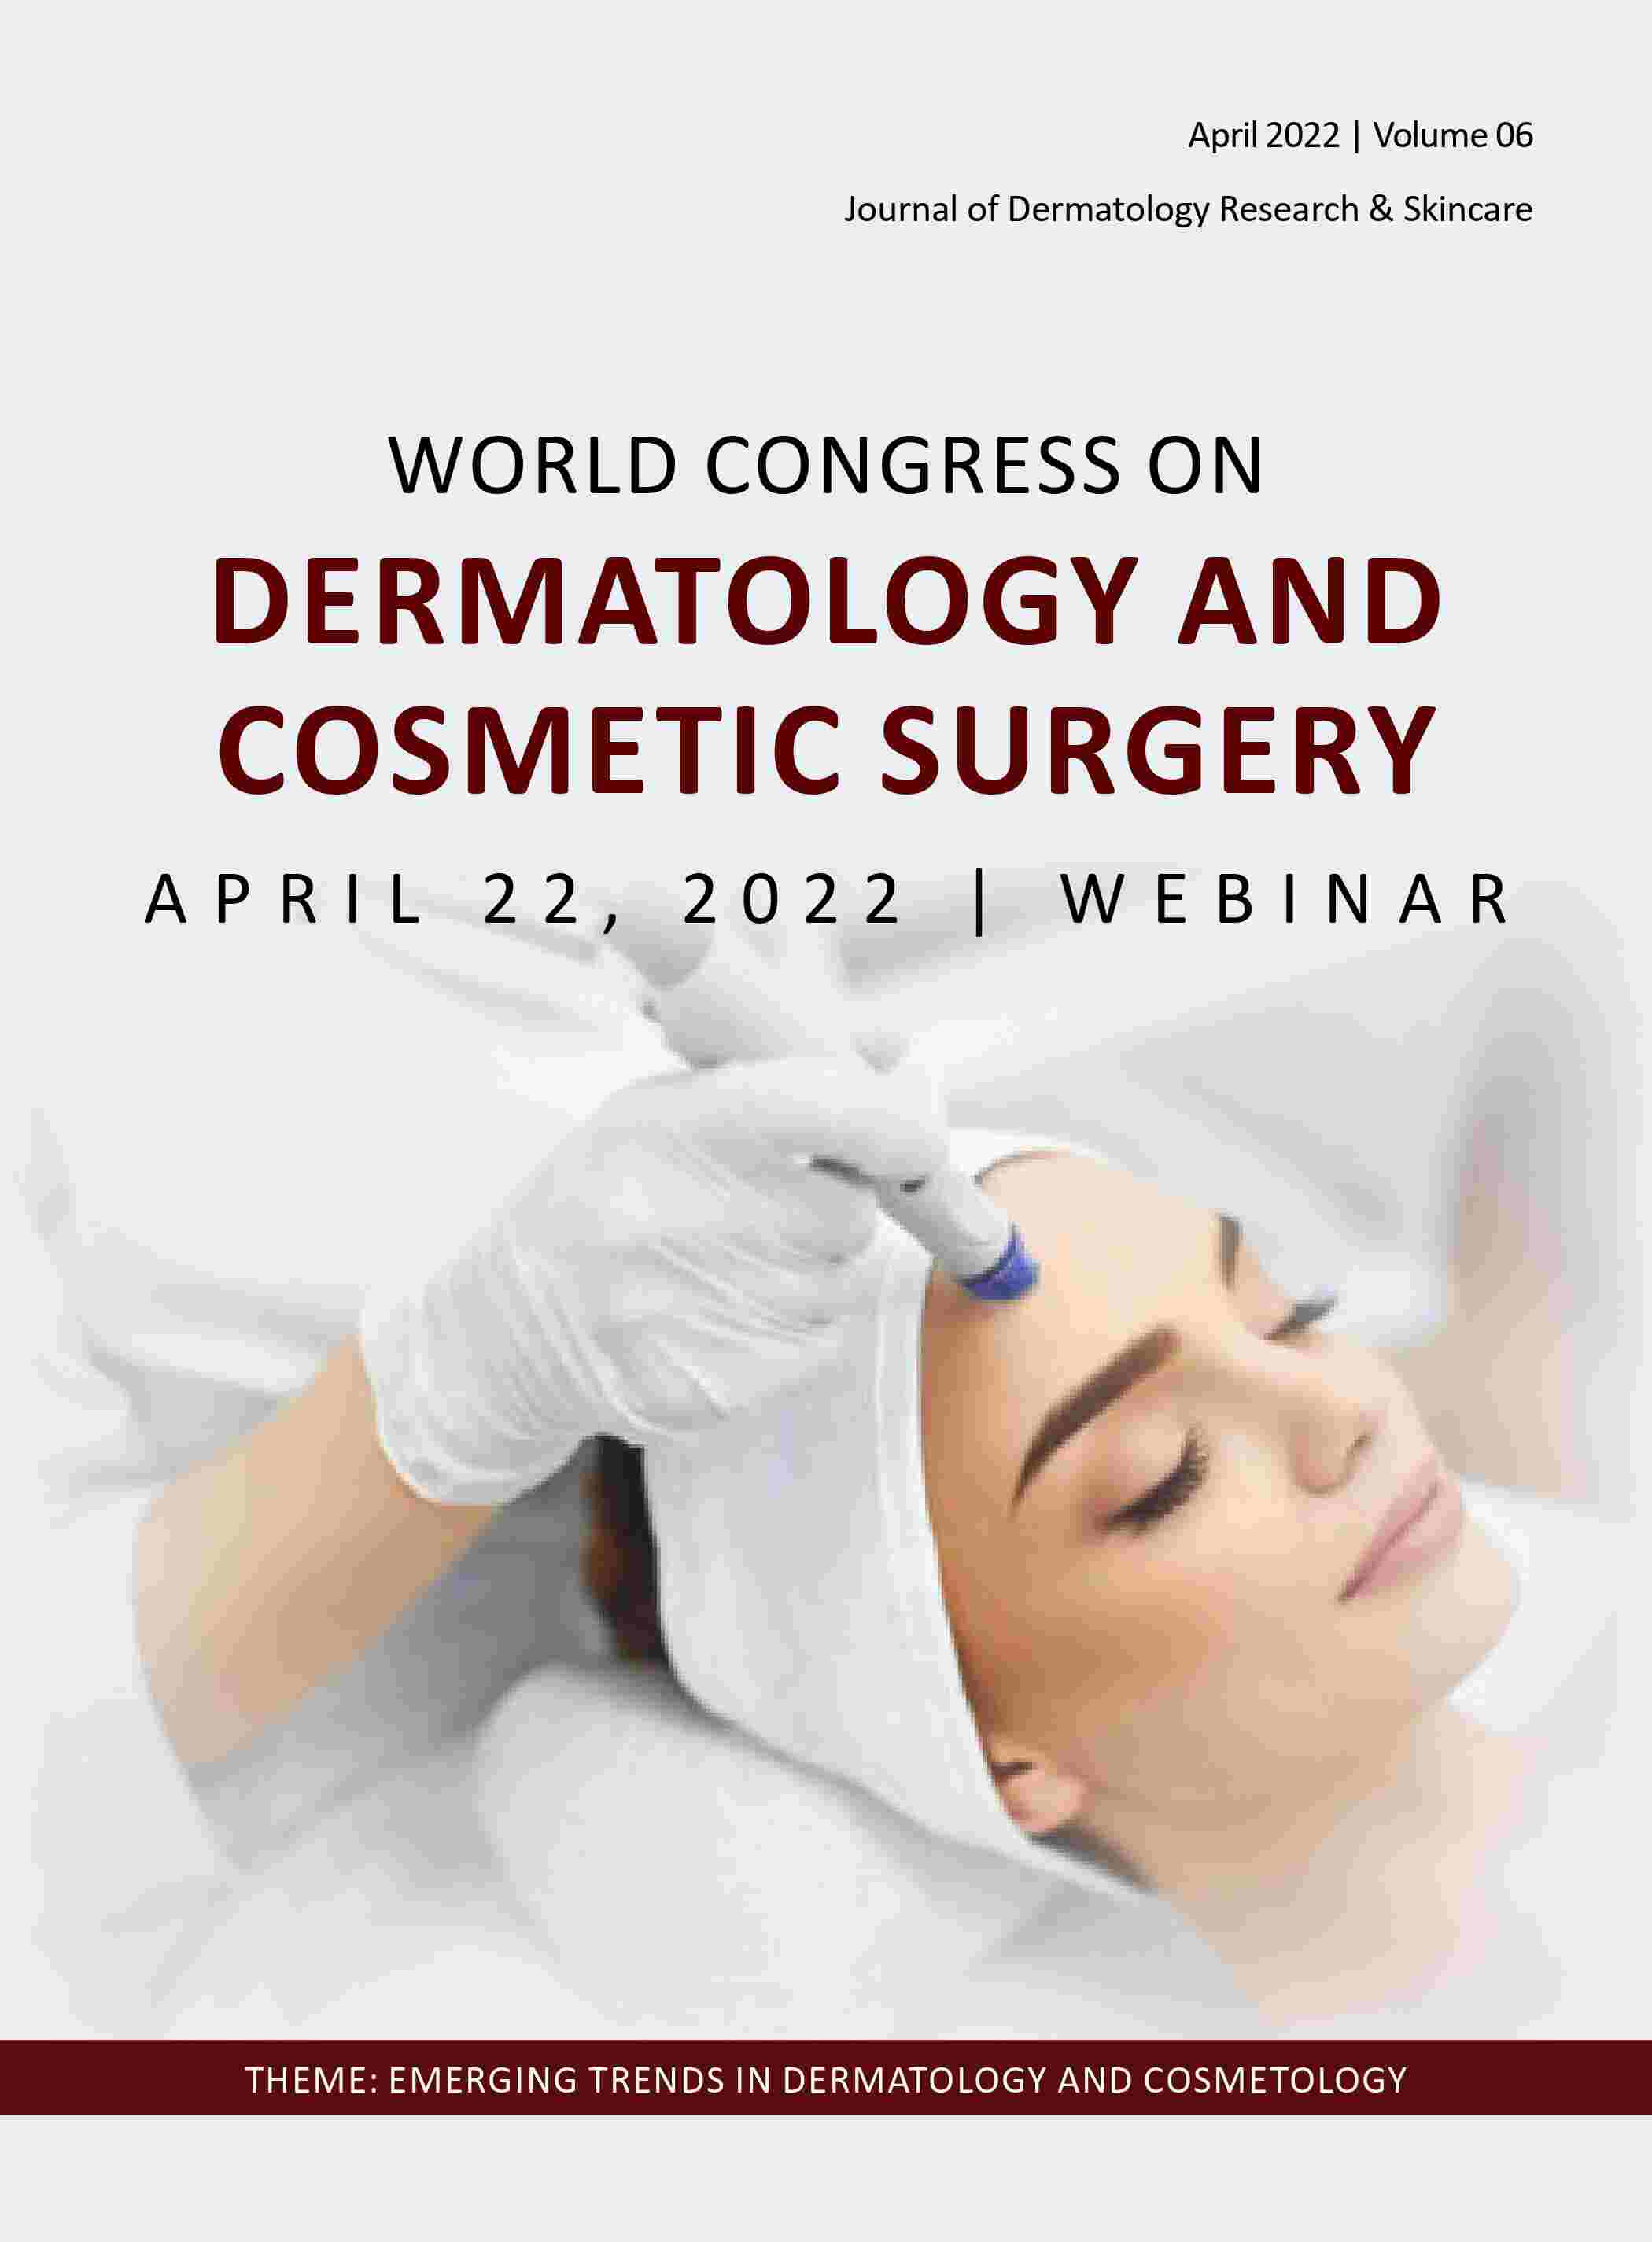 https://www.alliedacademies.org/conference-abstracts/dermatology-april-2022-proceedings.html